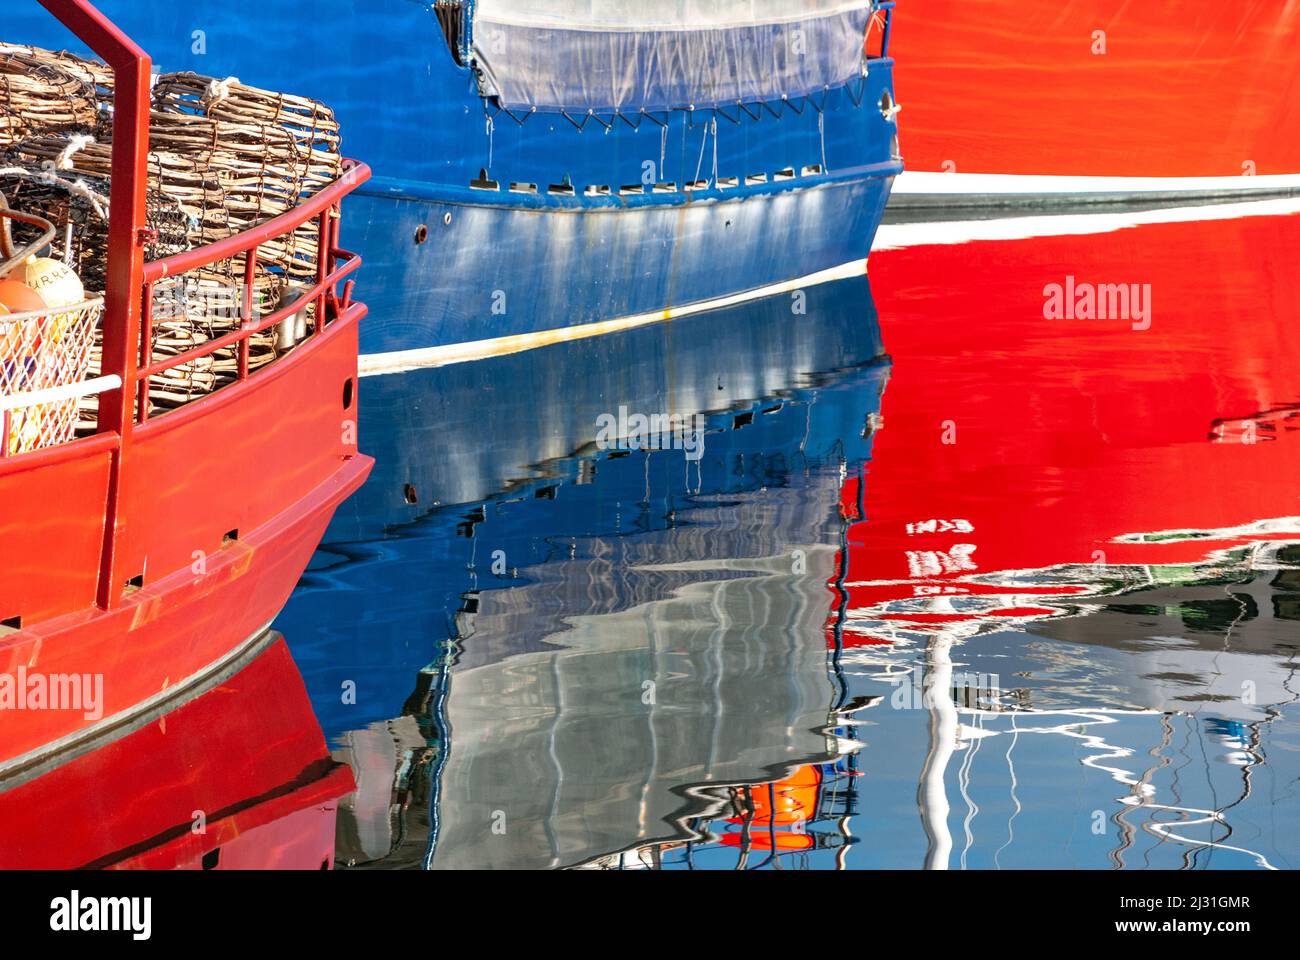 Reflection of colorful boats in the water, Halifax, Nova Scotia, Canada Stock Photo